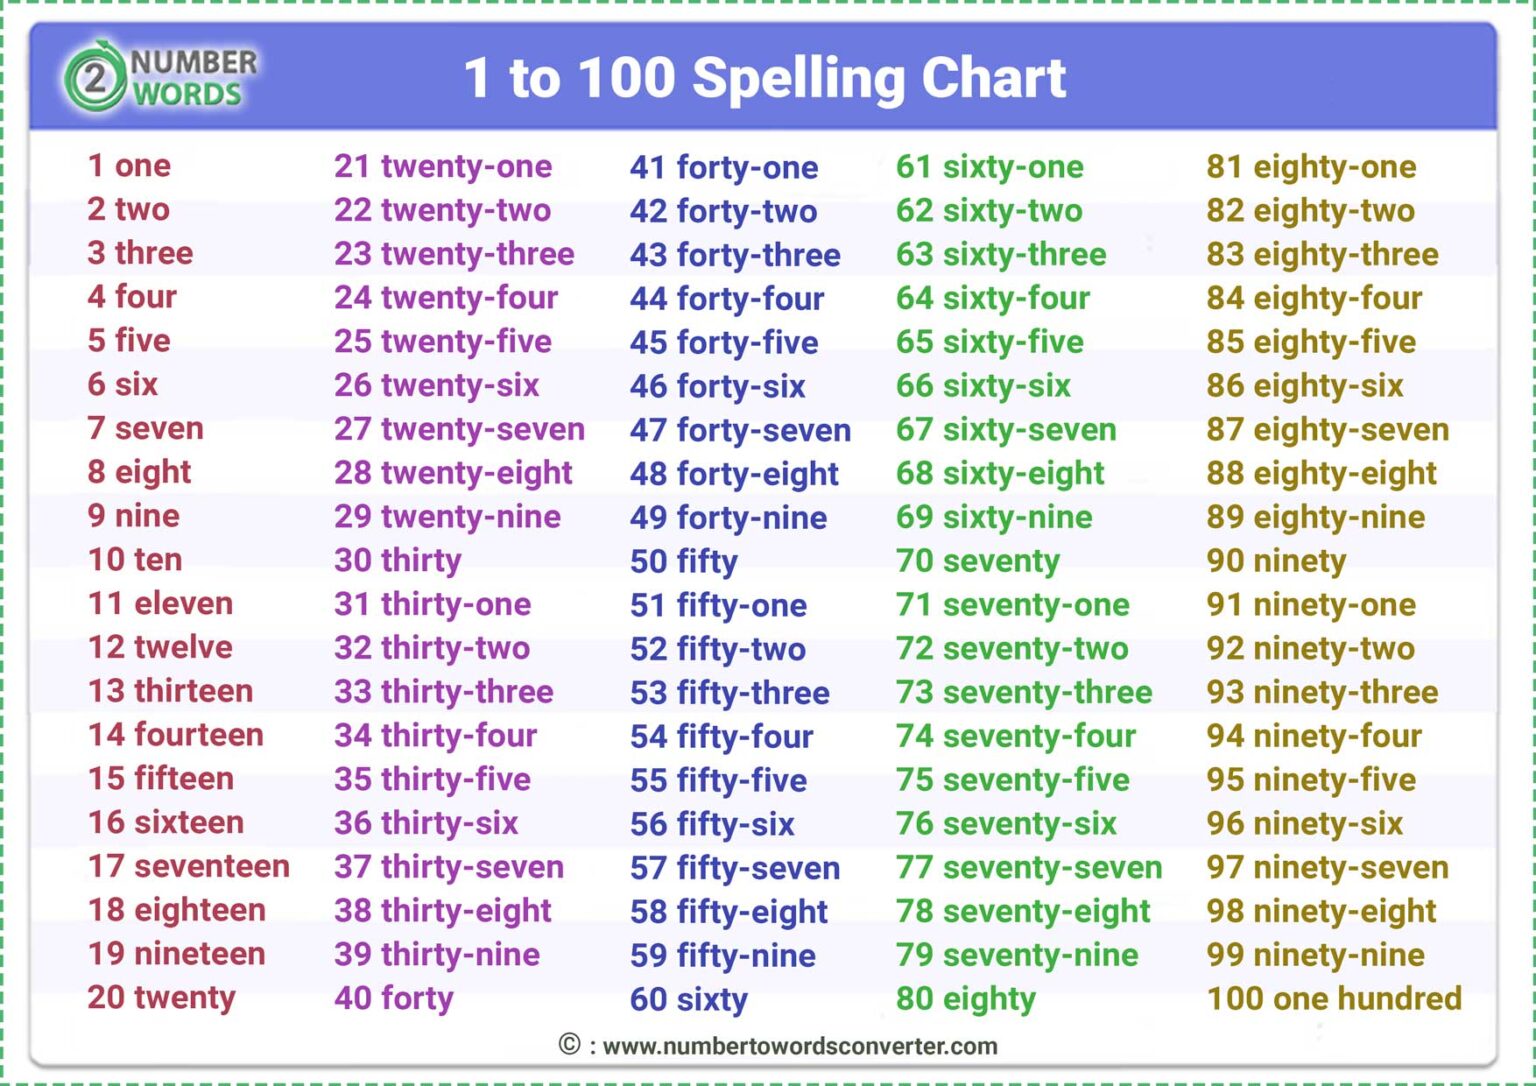 Counting Numbers in English From 1 to 100 Spelling Chart